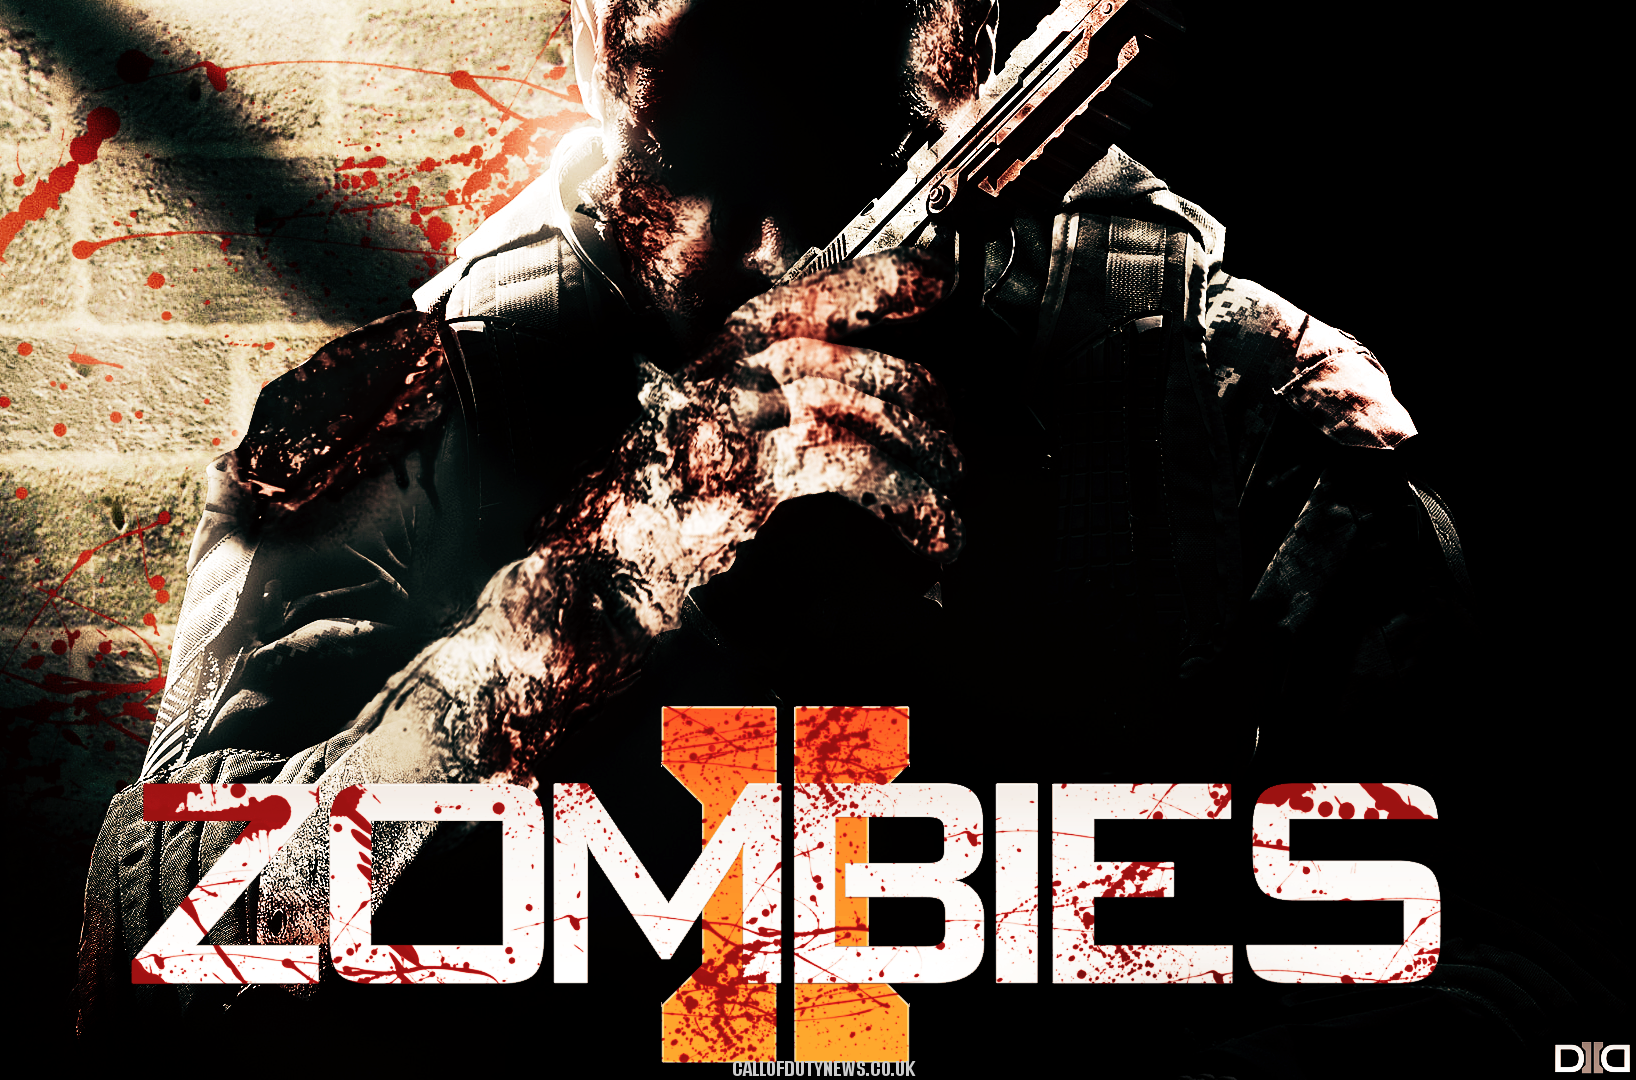 black ops 2 zombies mac free download